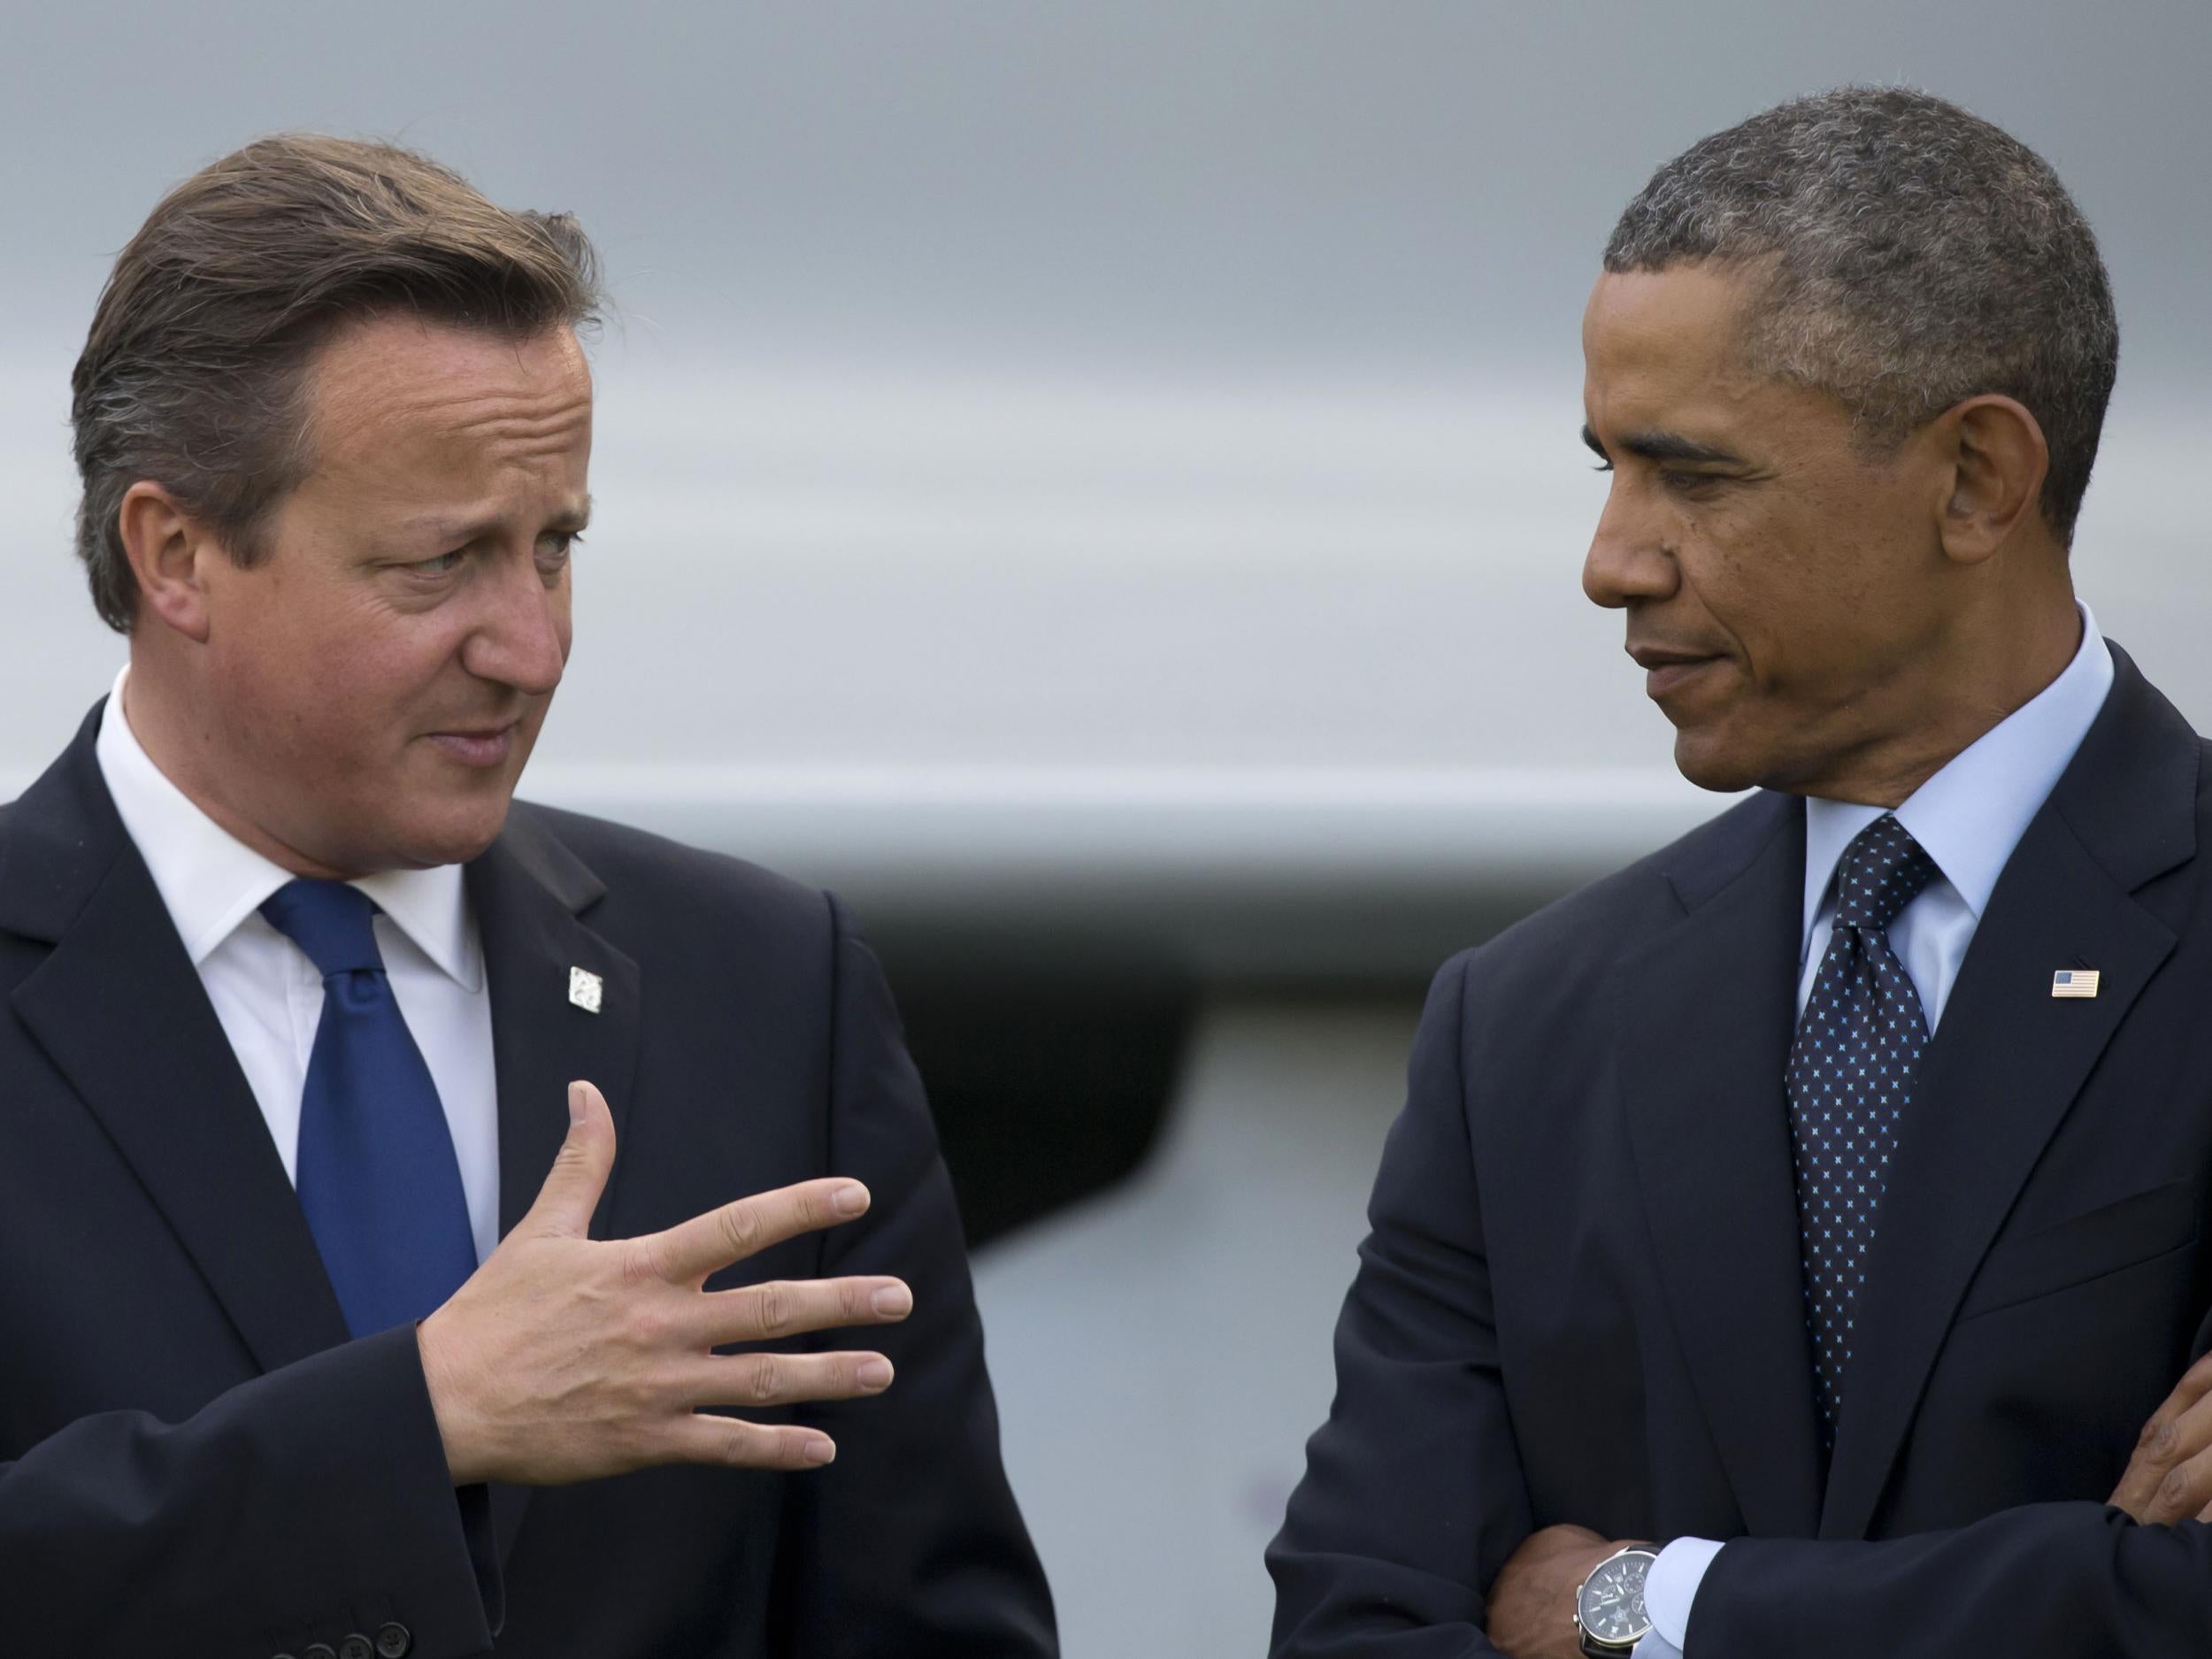 Barack Obama is expected to make comments supporting David Cameron's remain campaign later this week